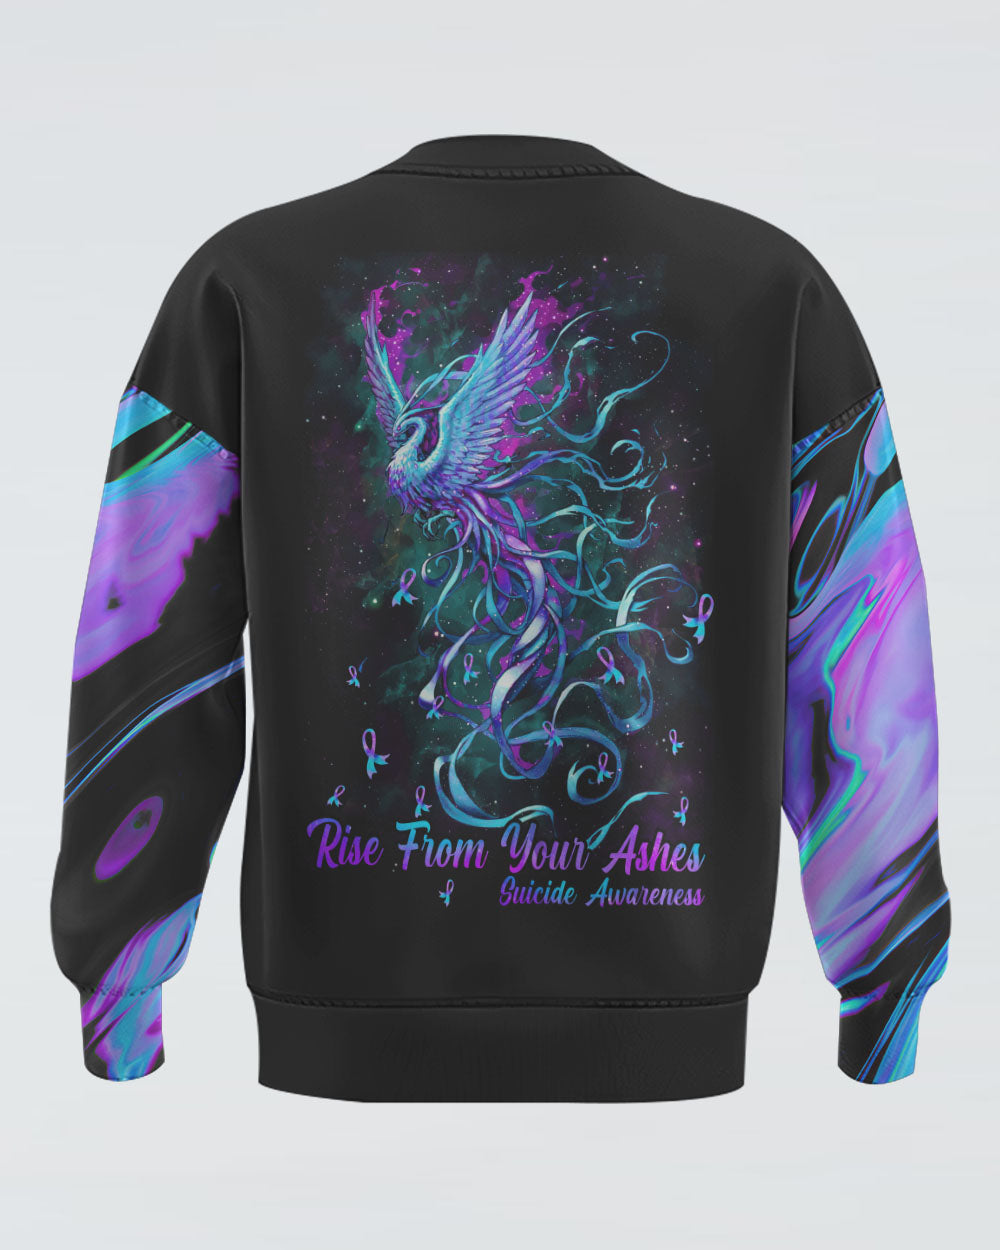 Rise From The Ashes Phoenix Women's Suicide Prevention Awareness Sweatshirt